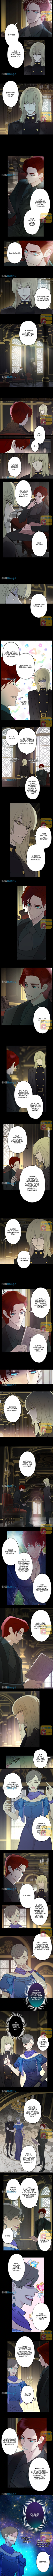 As Long As You Like It - Page 1